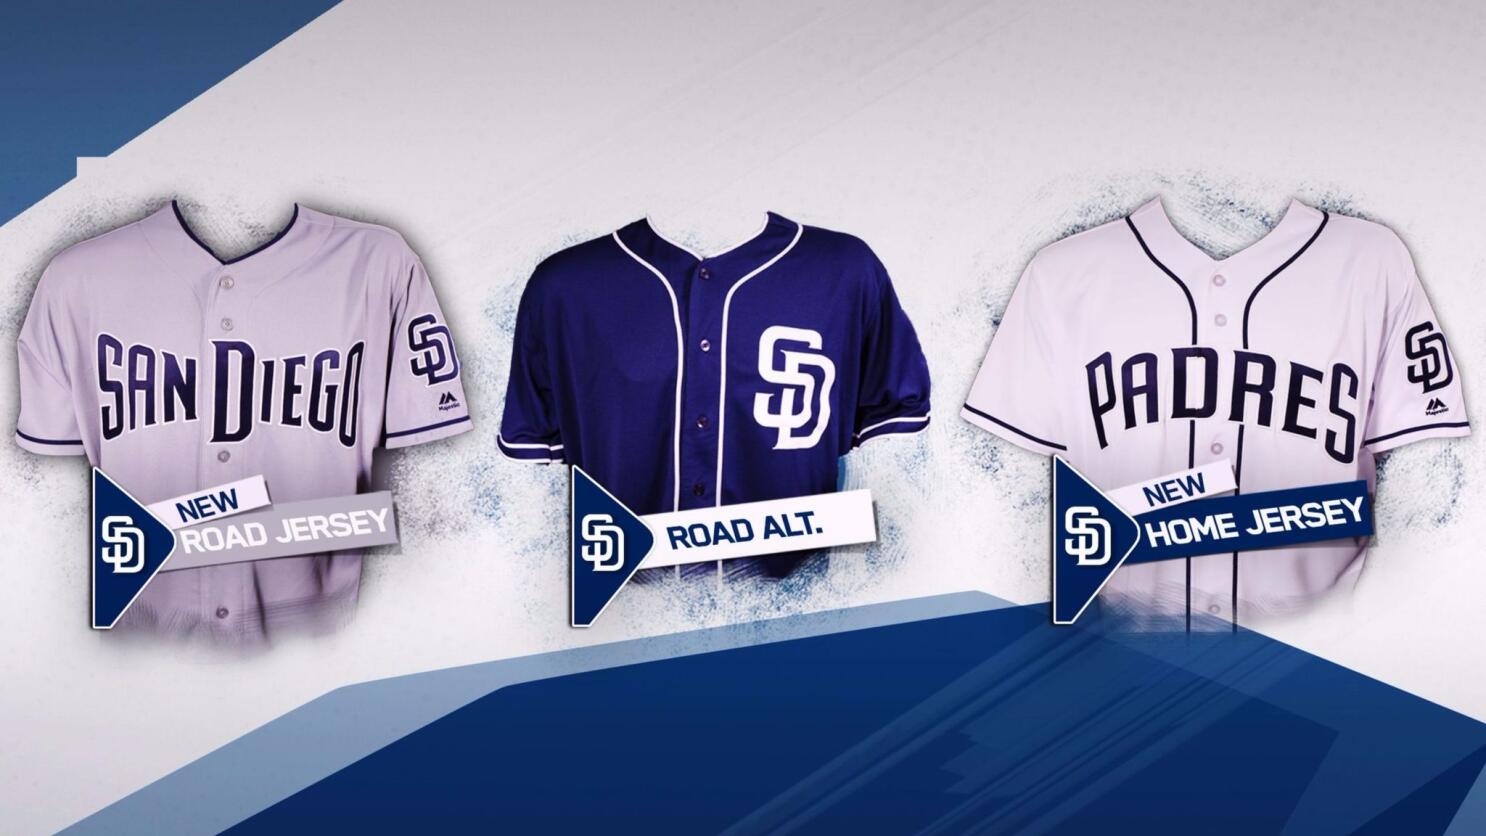 Padres will not wear blue and yellow in 2017 - Gaslamp Ball